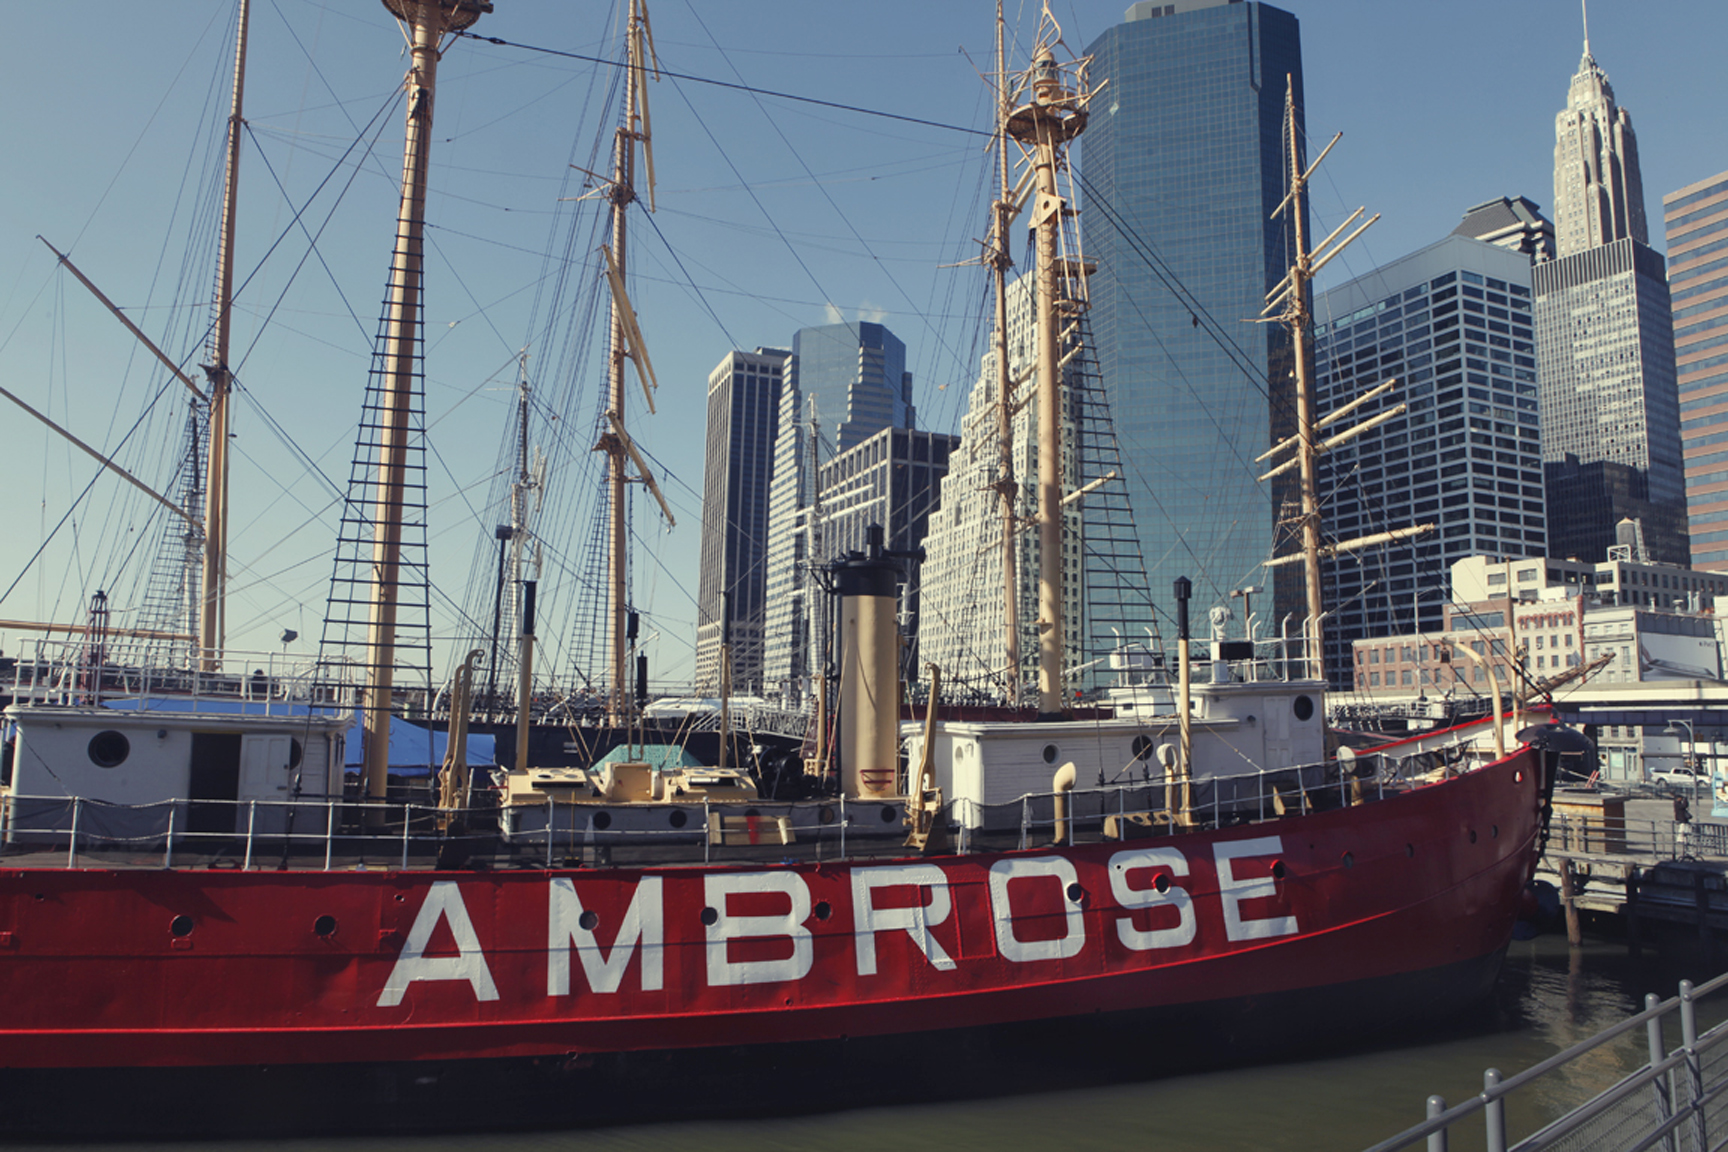 The lightship Ambrose at South Street Seaport Museum is now a National Landmark. (Photo: Sarah Coulter / courtesy South Street Seaport Museum Archives)